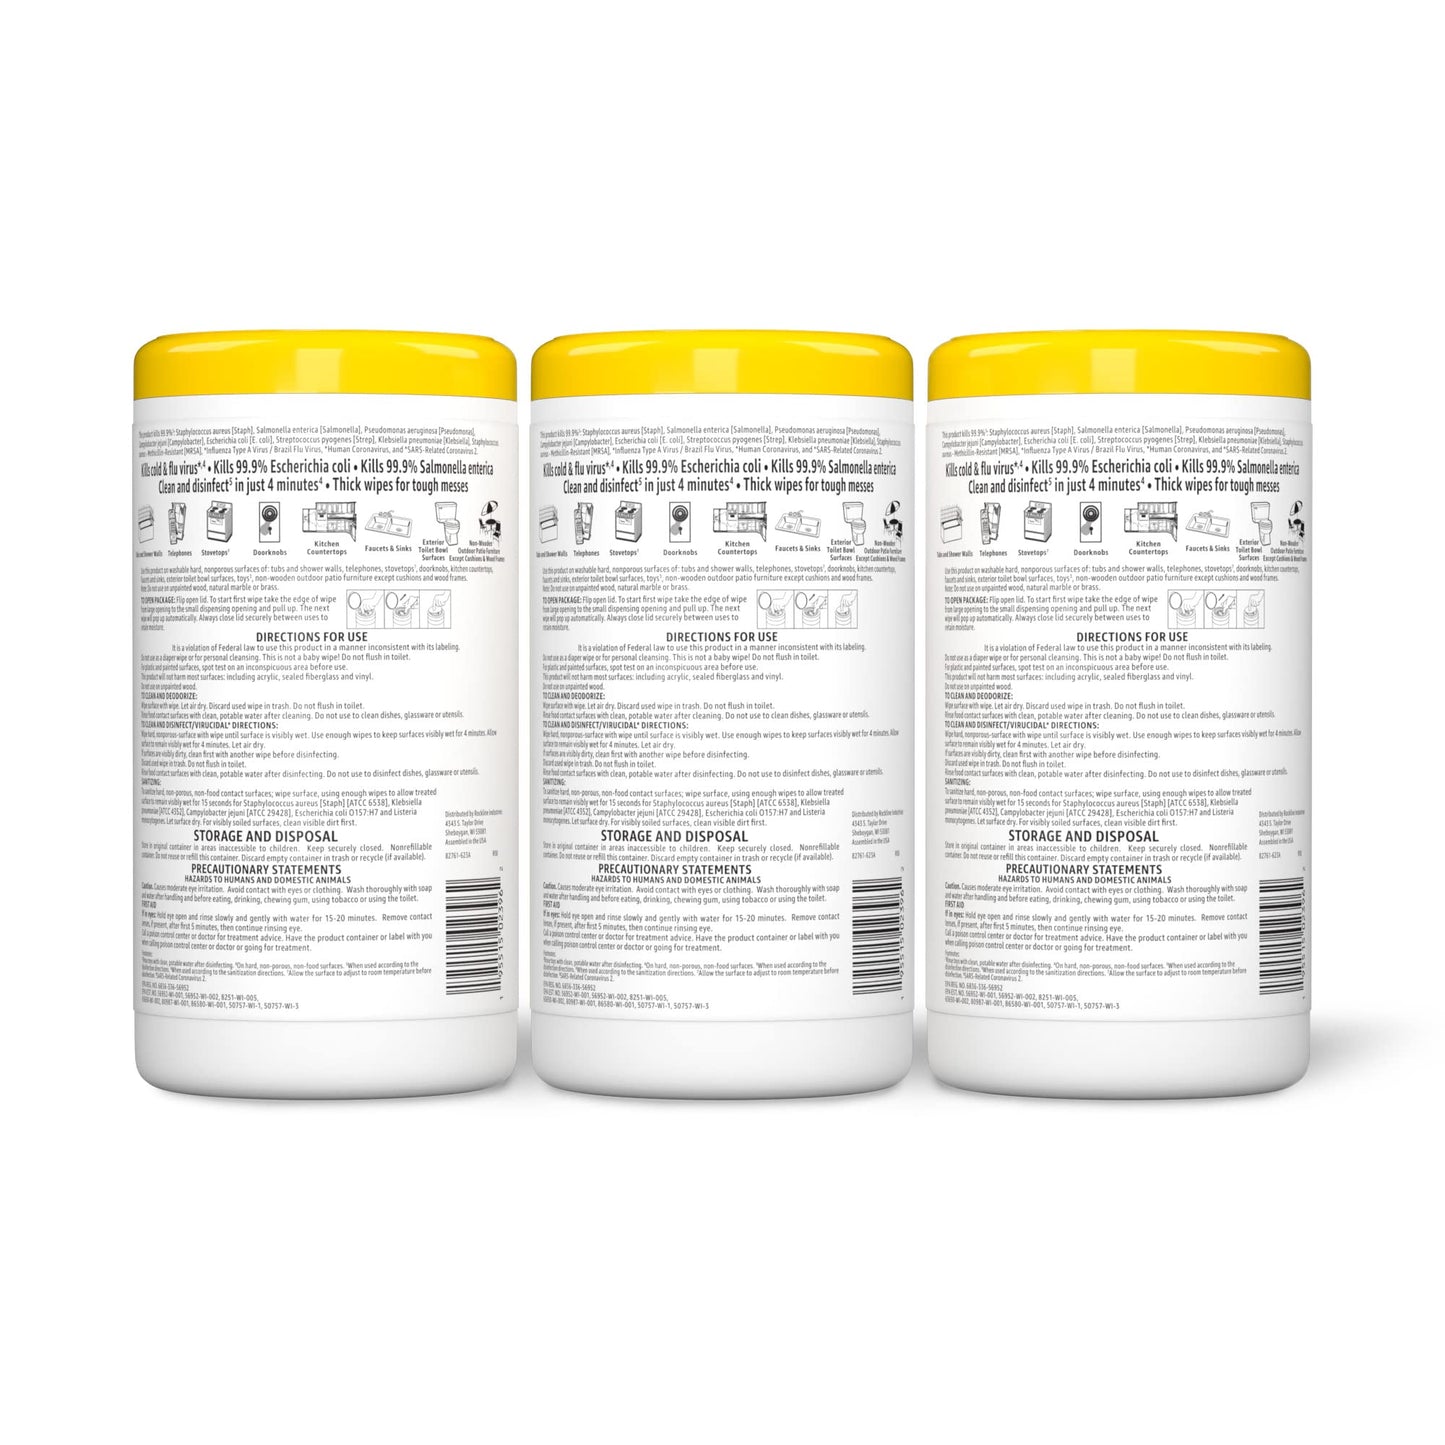 Basics Disinfecting Wipes, Lemon & Fresh Scent, Sanitizes/Cleans/Disinfects/Deodorizes, 340 Count (4 Packs of 85)